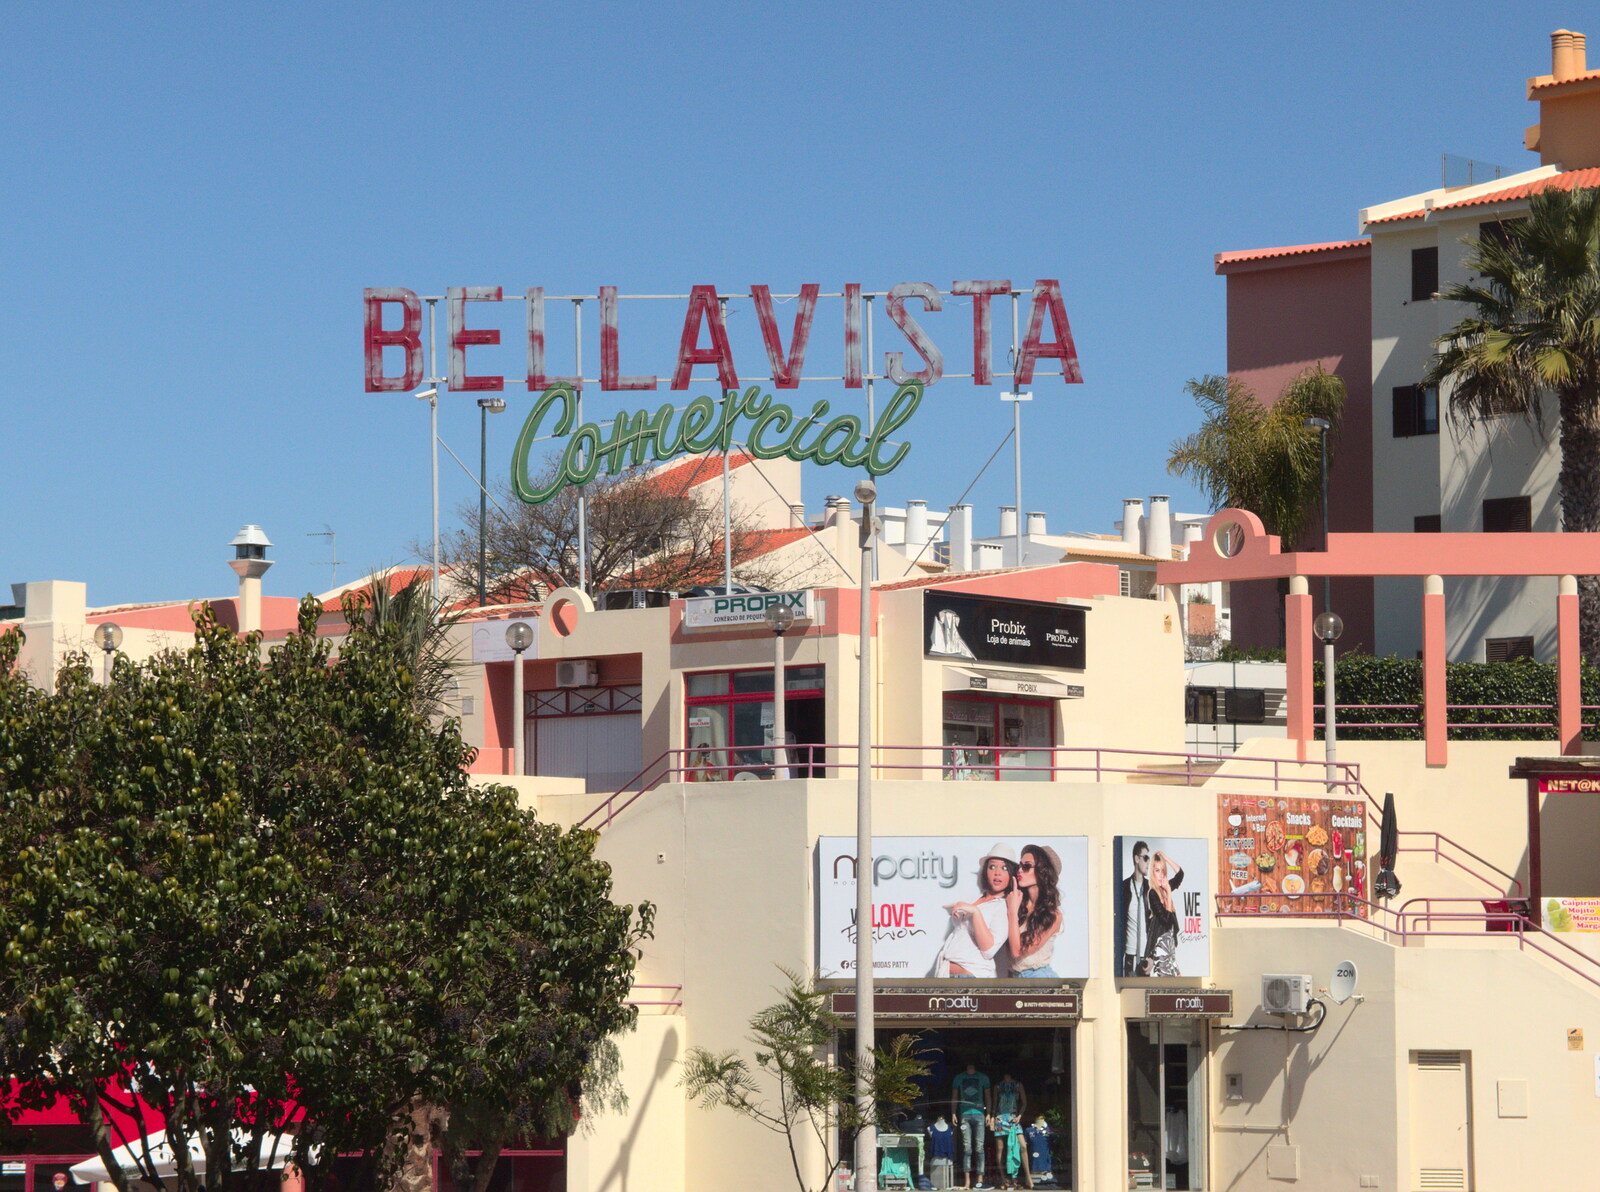 An old sign for Bellavista Comercial from Last Days and the Journey Home, Albufeira, Portugal - 9th April 2016